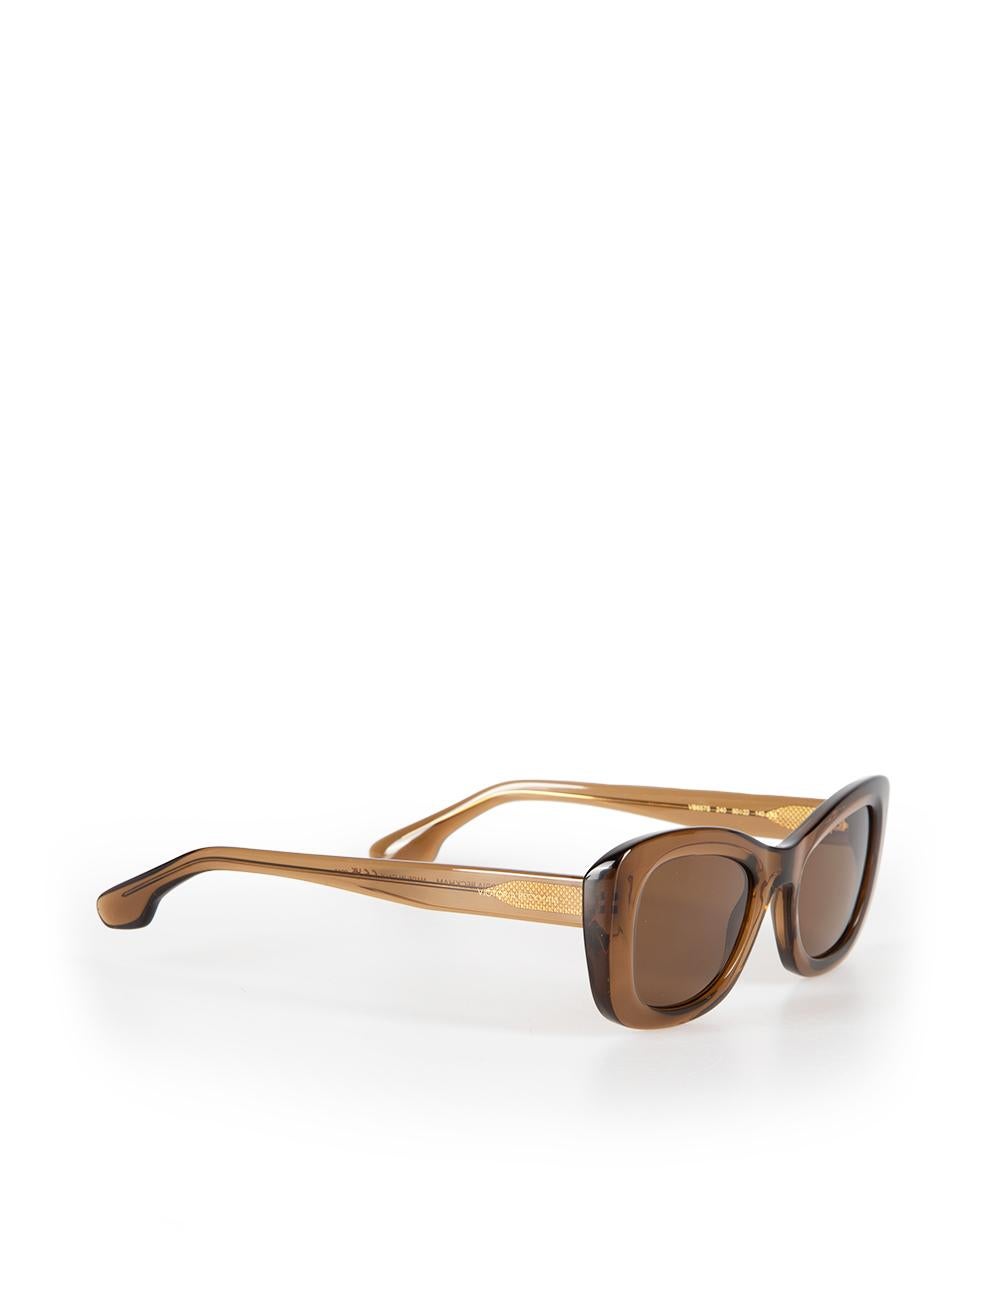 Victoria Beckham Caramel Butterfly Sunglasses In New Condition For Sale In London, GB